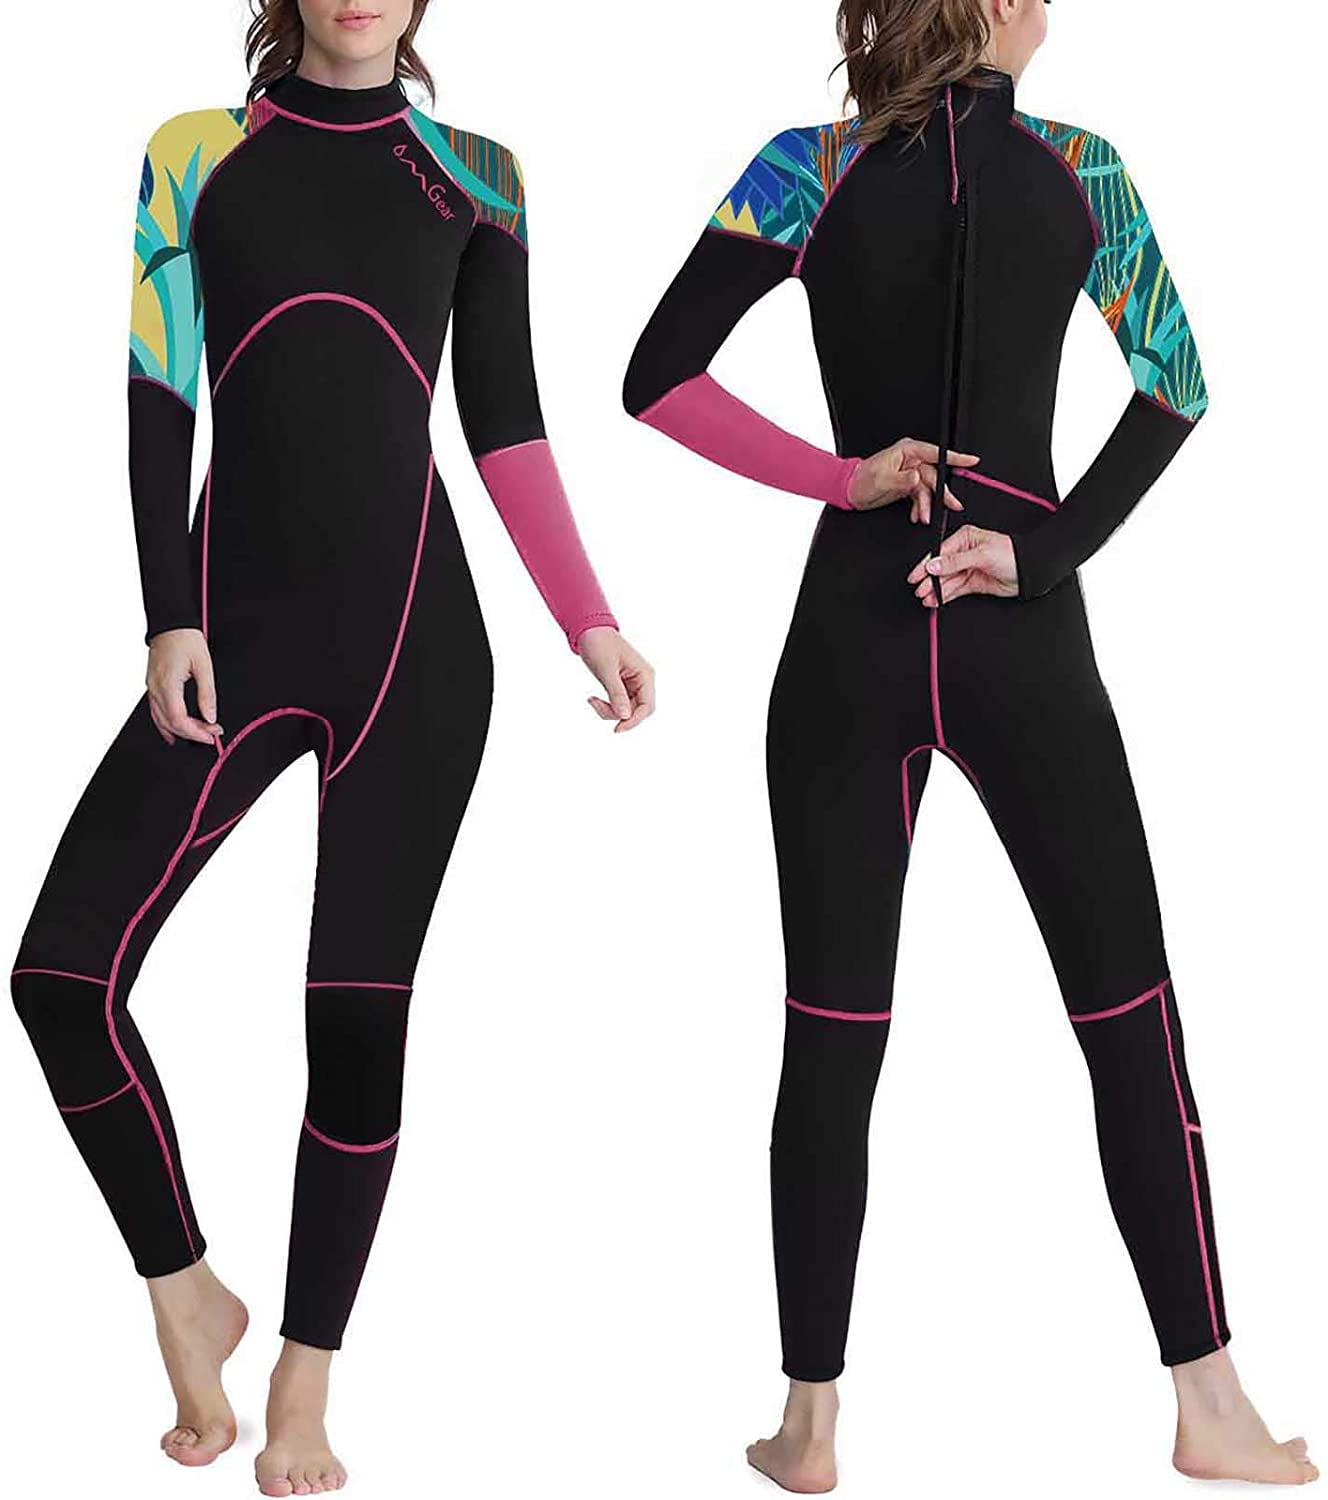 Hevto Men Wetsuits Women 3mm Neoprene Full Scuba Diving Suits Surfing Swimming Long Sleeve Keep Warm Back Zip for Water Sports 